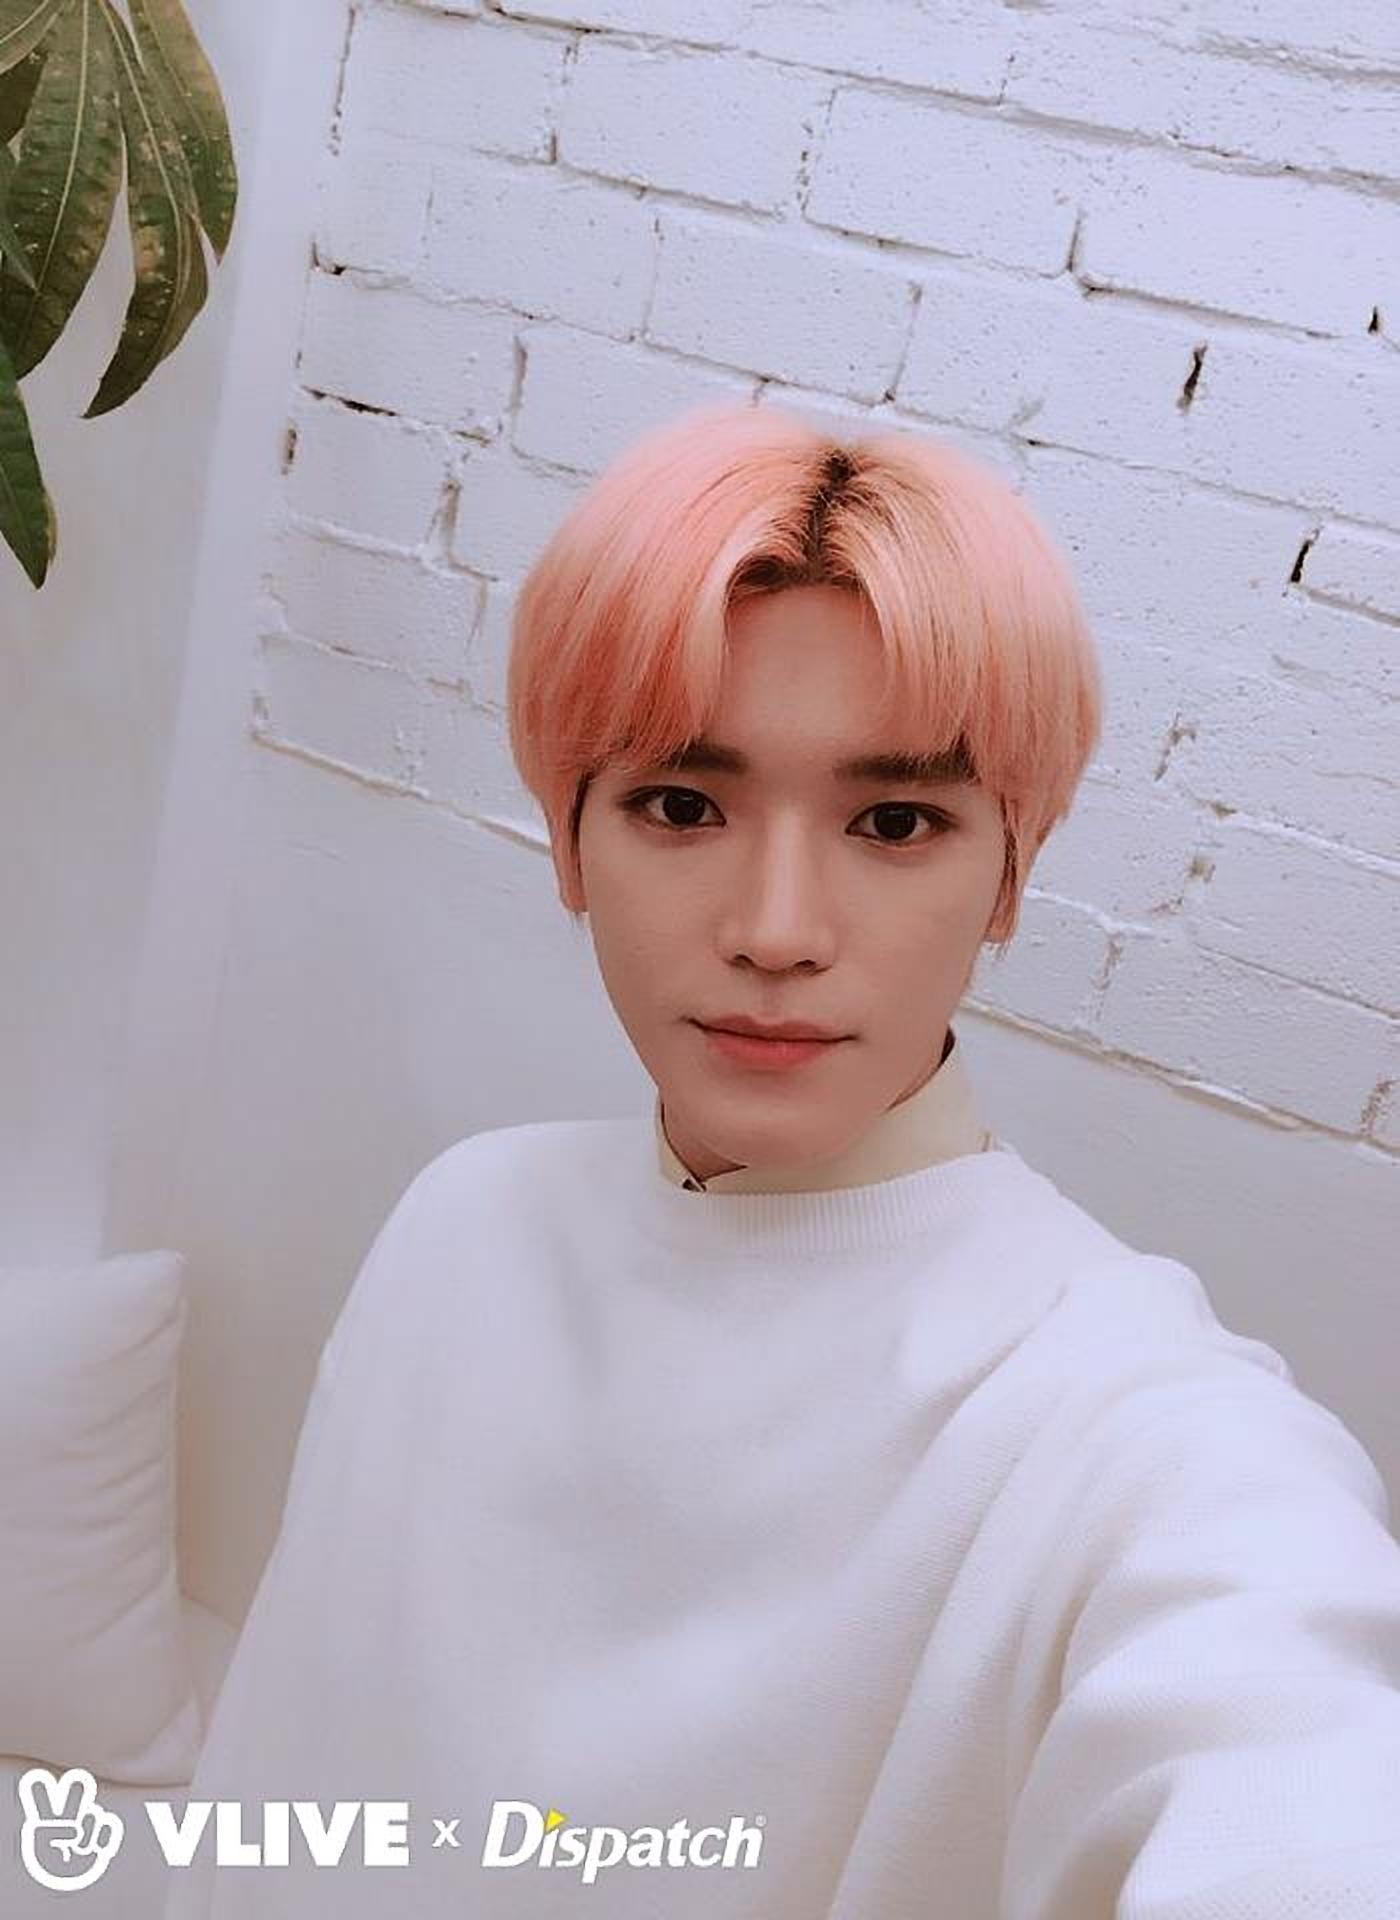 VLIVE x DISPATCH update with Duo NCT's Taeyong